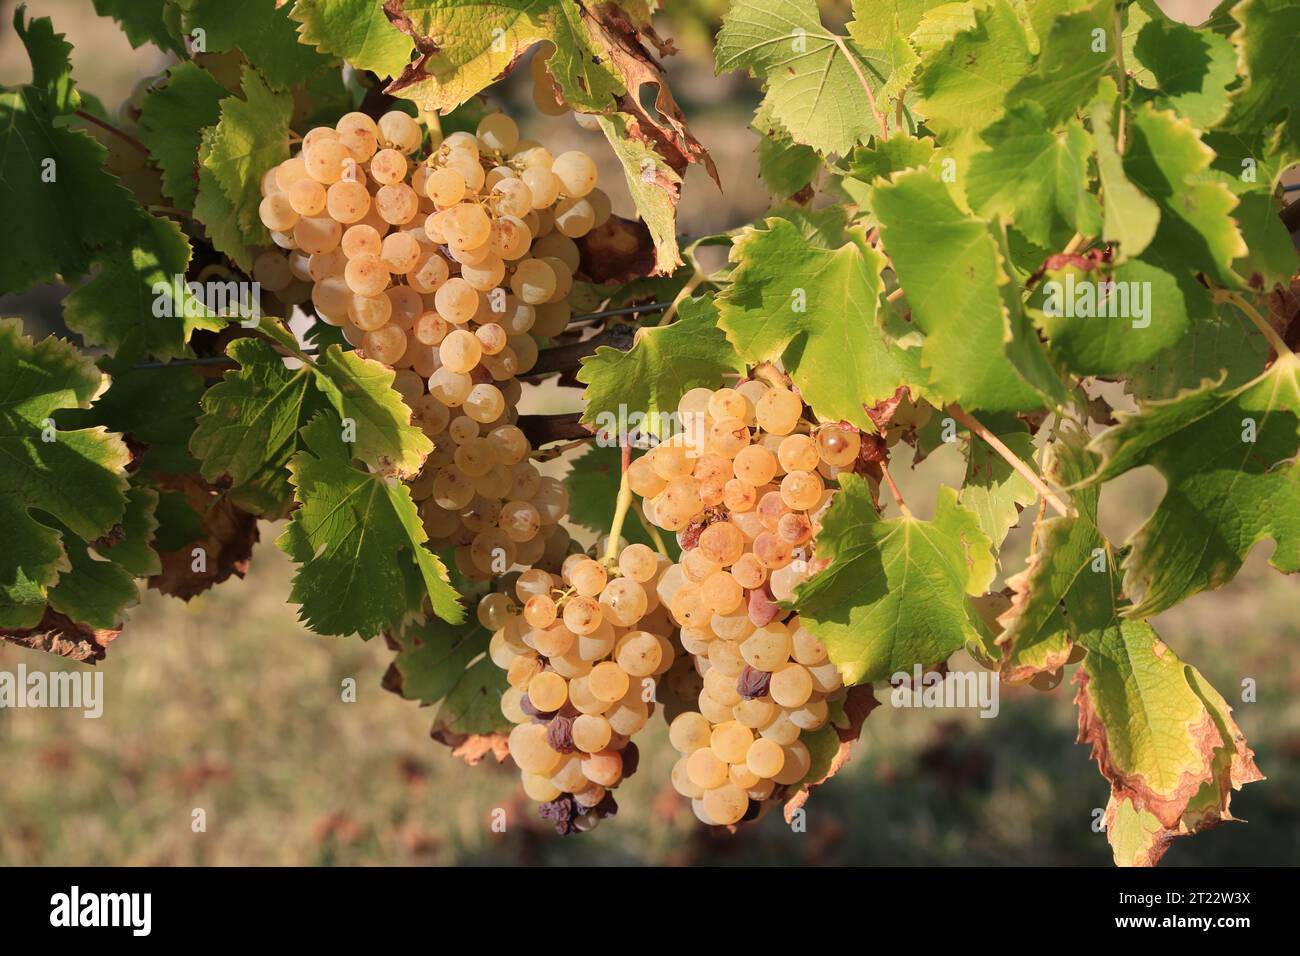 Monbazillac. Bunches of grapes with the beginning of noble rot (Botrytis cinerea) sign of maturity for harvesting in the vines and vineyard of Monbazi Stock Photo